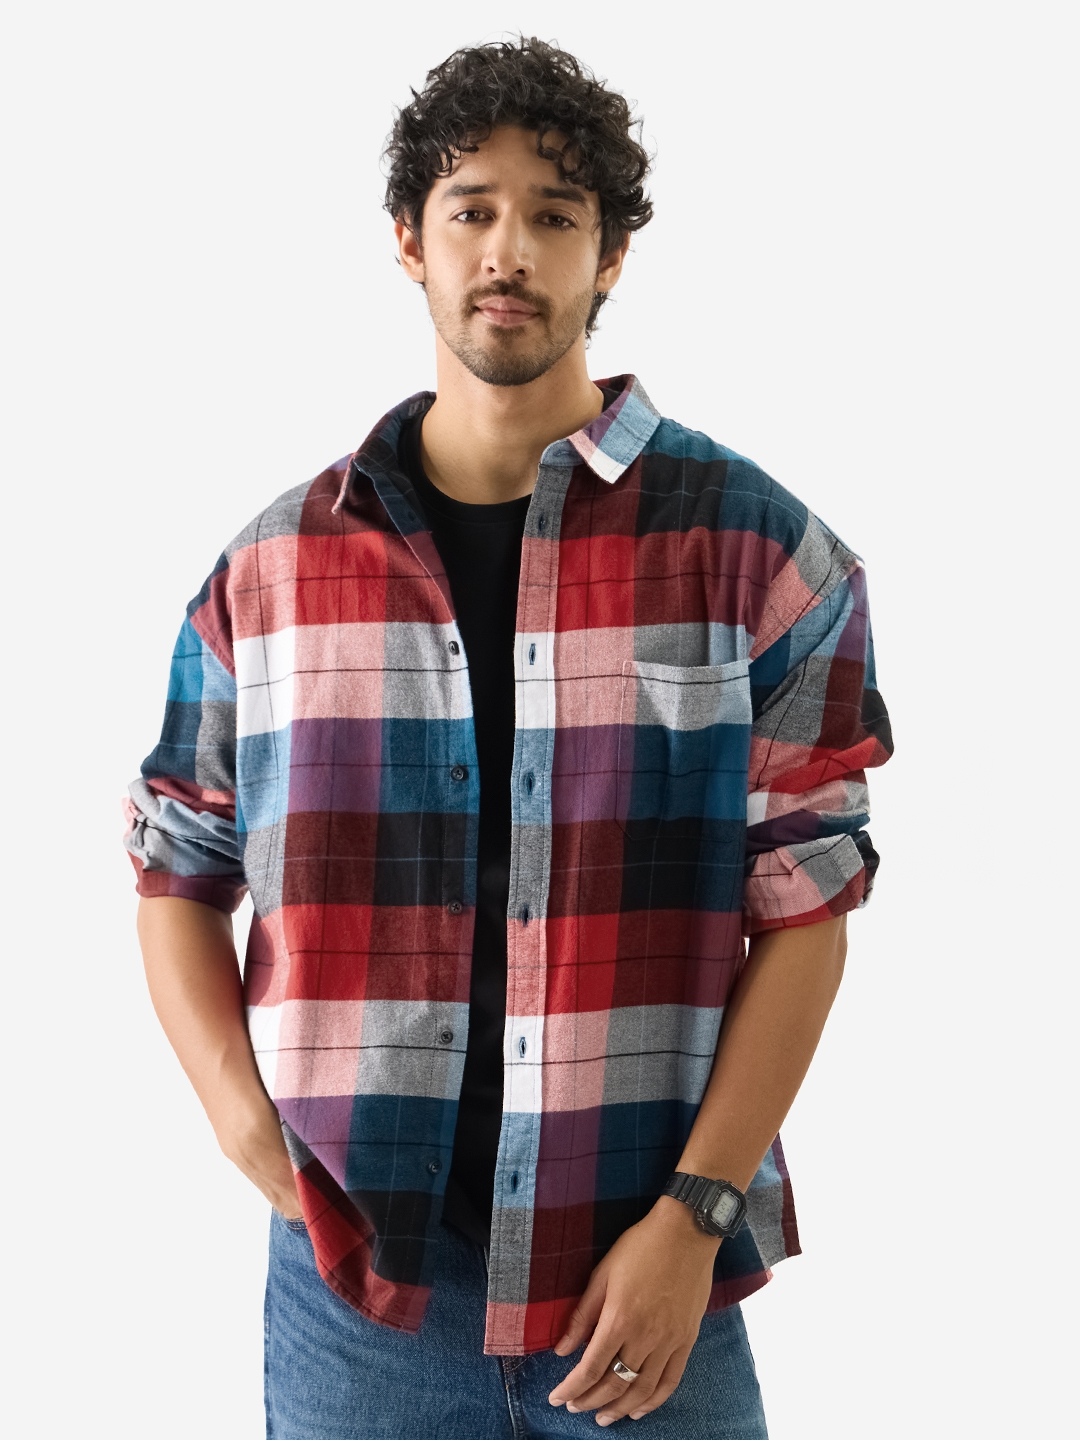 Men's Black, Blue and Red Relaxed Casual Shirt